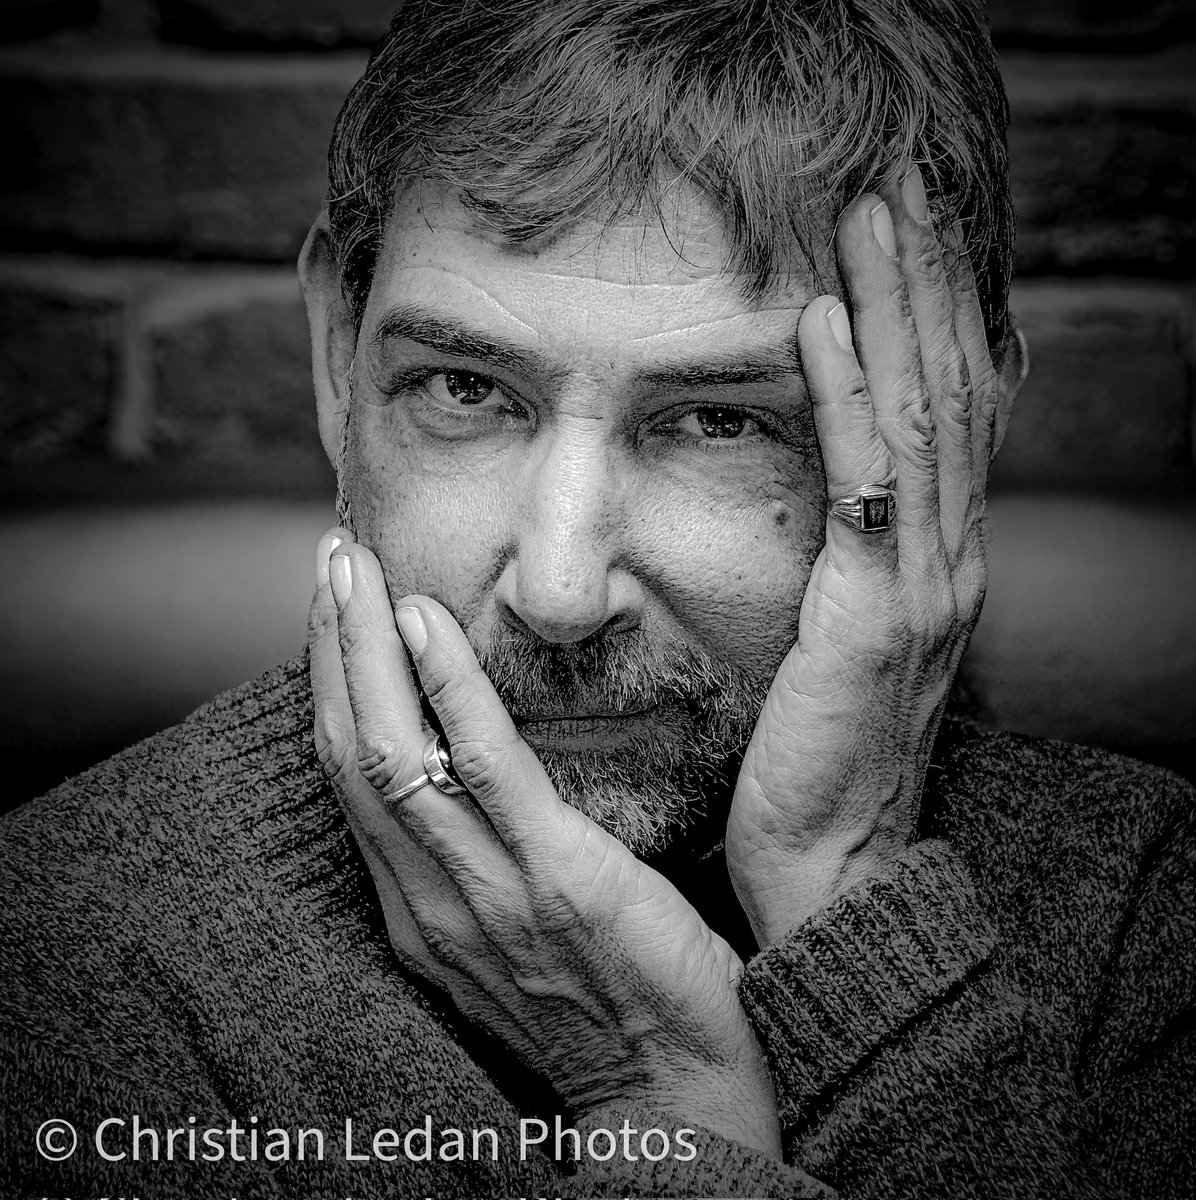 Jeff in sweater
2016

 #christianledanphotos #photography #fotografia #teamcanon #bnw #bnwphotography #blackandwhite #blackandwhitephotography #portraitphotography #portraiture #portrait #bnwportrait